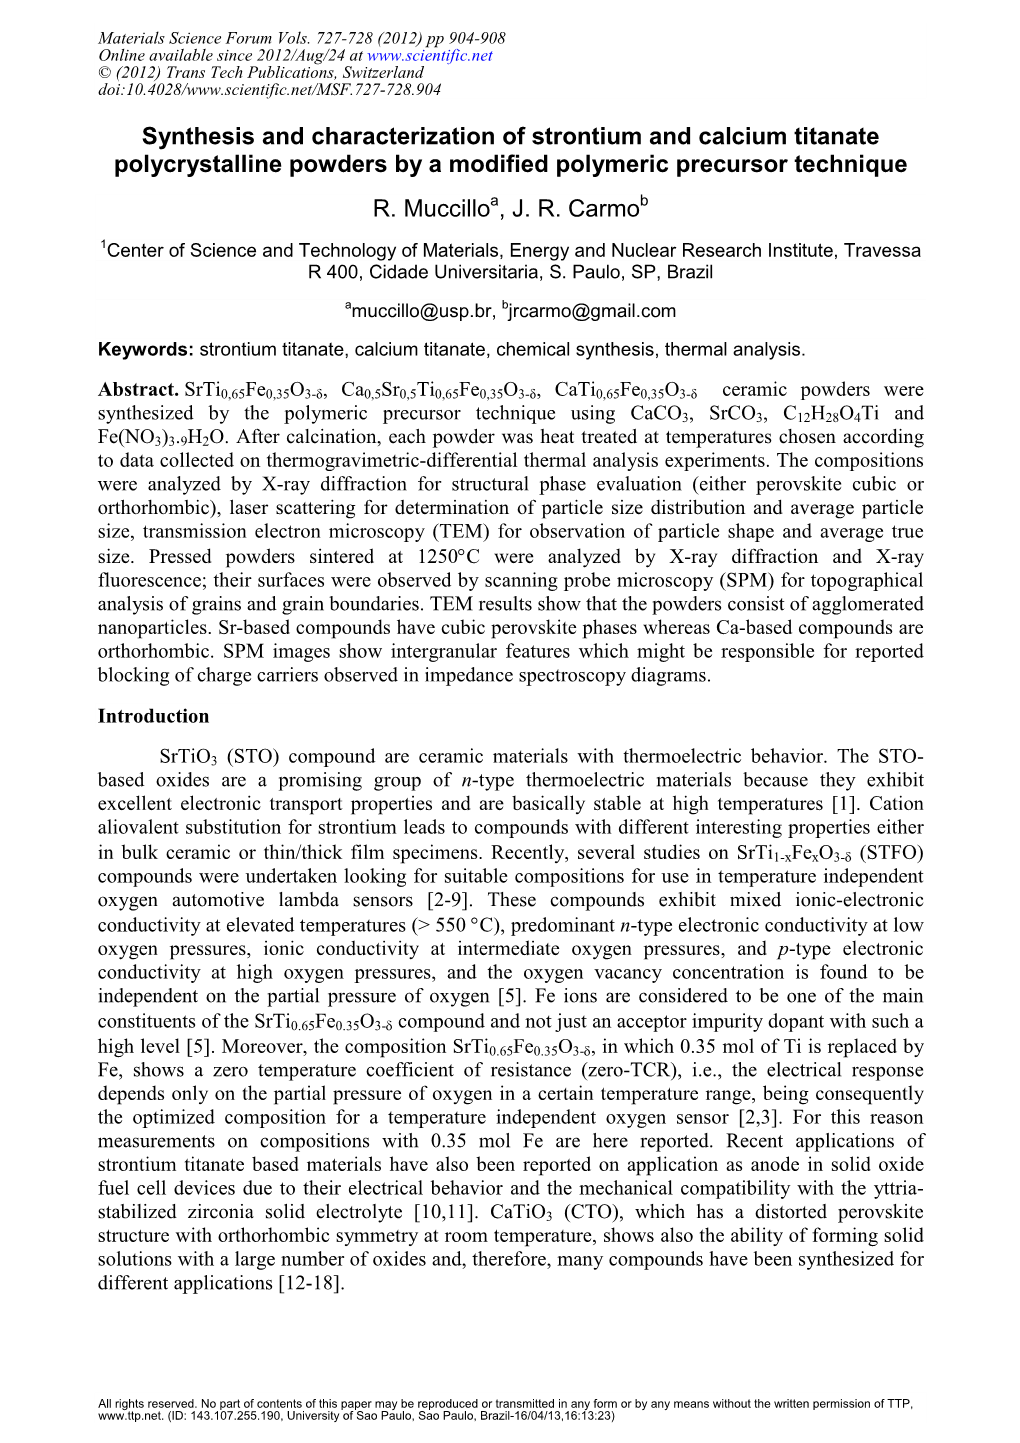 Synthesis and Characterization of Strontium and Calcium Titanate Polycrystalline Powders by a Modified Polymeric Precursor Technique R